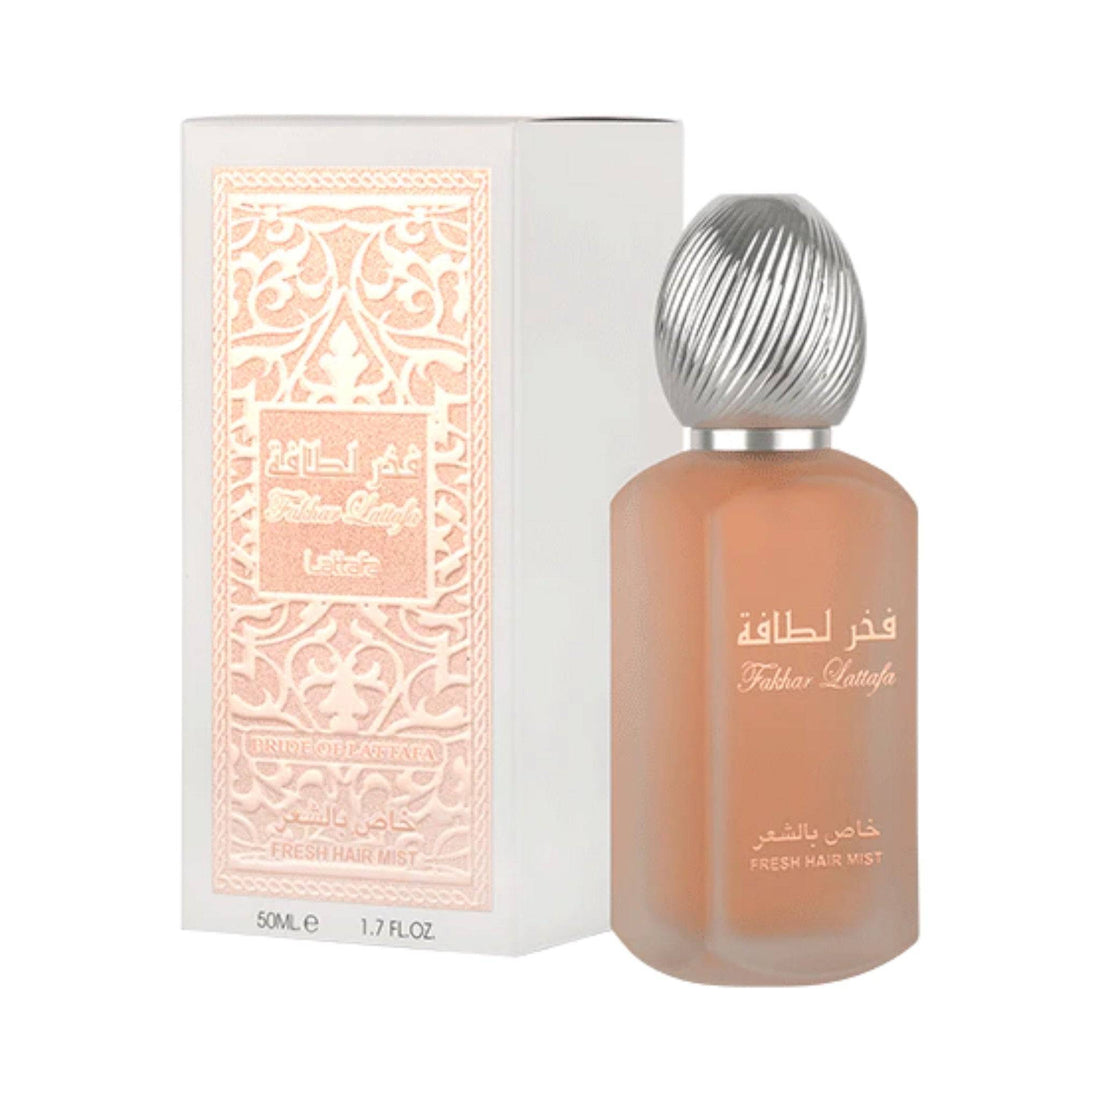 Fakhar Lattafa Fresh Hair Mist 50ml bottle surrounded by its scent notes of fruits, flowers, and warm vanilla.